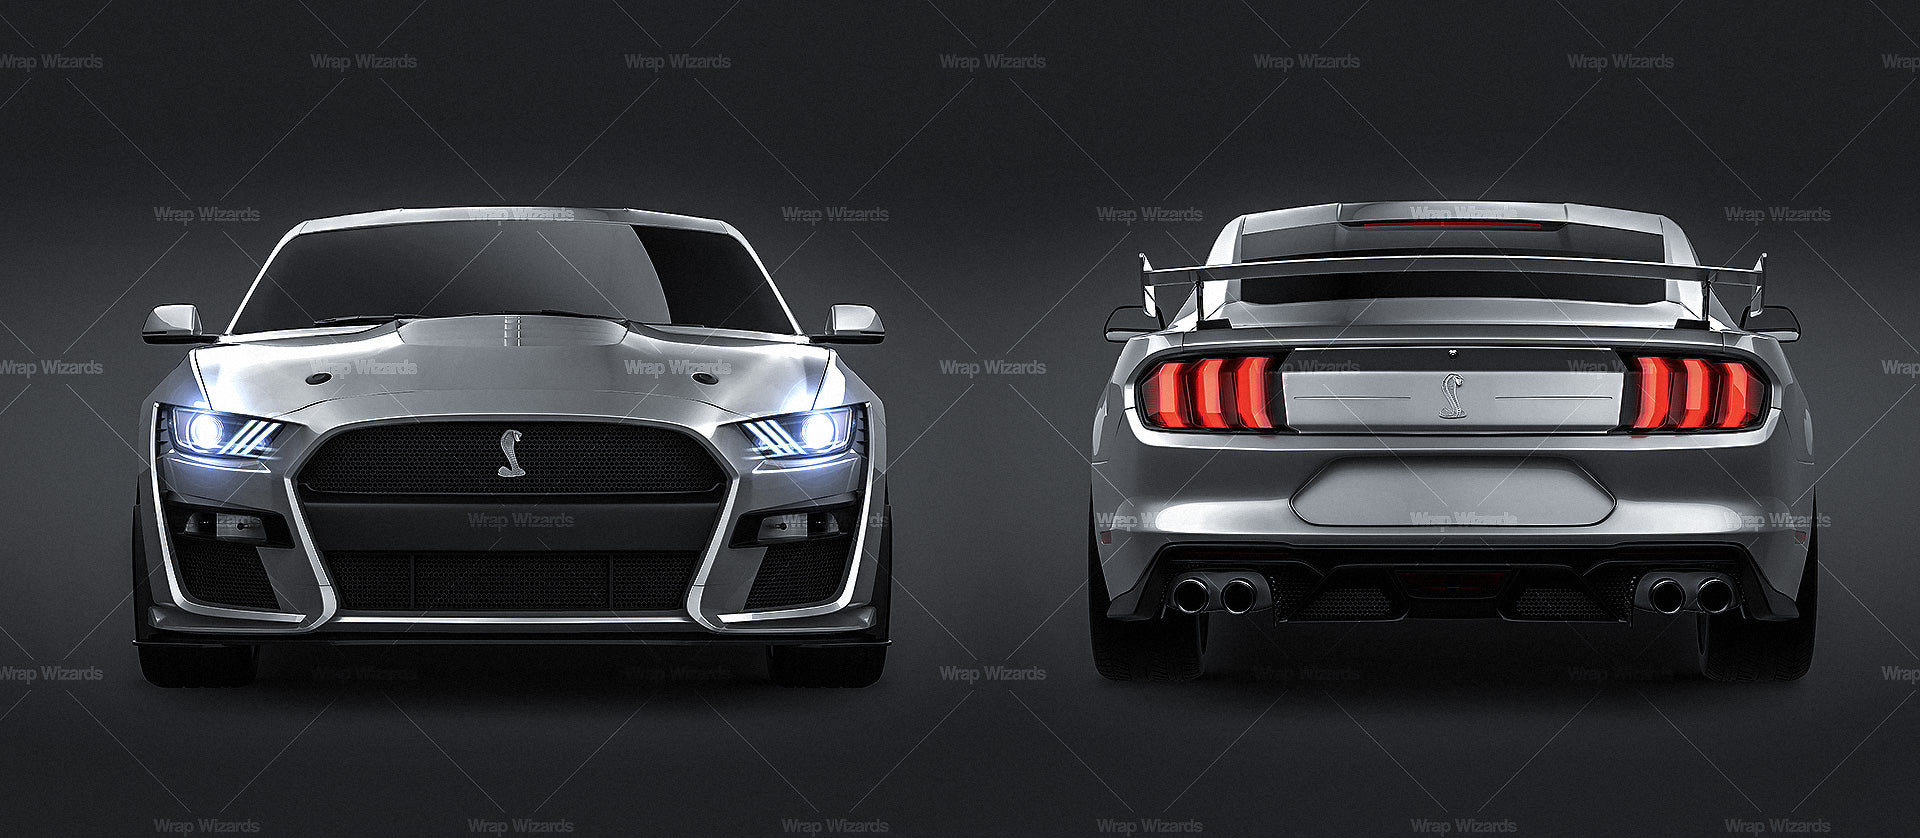 Ford Mustang Shelby GT500 2020 - Car Mockup